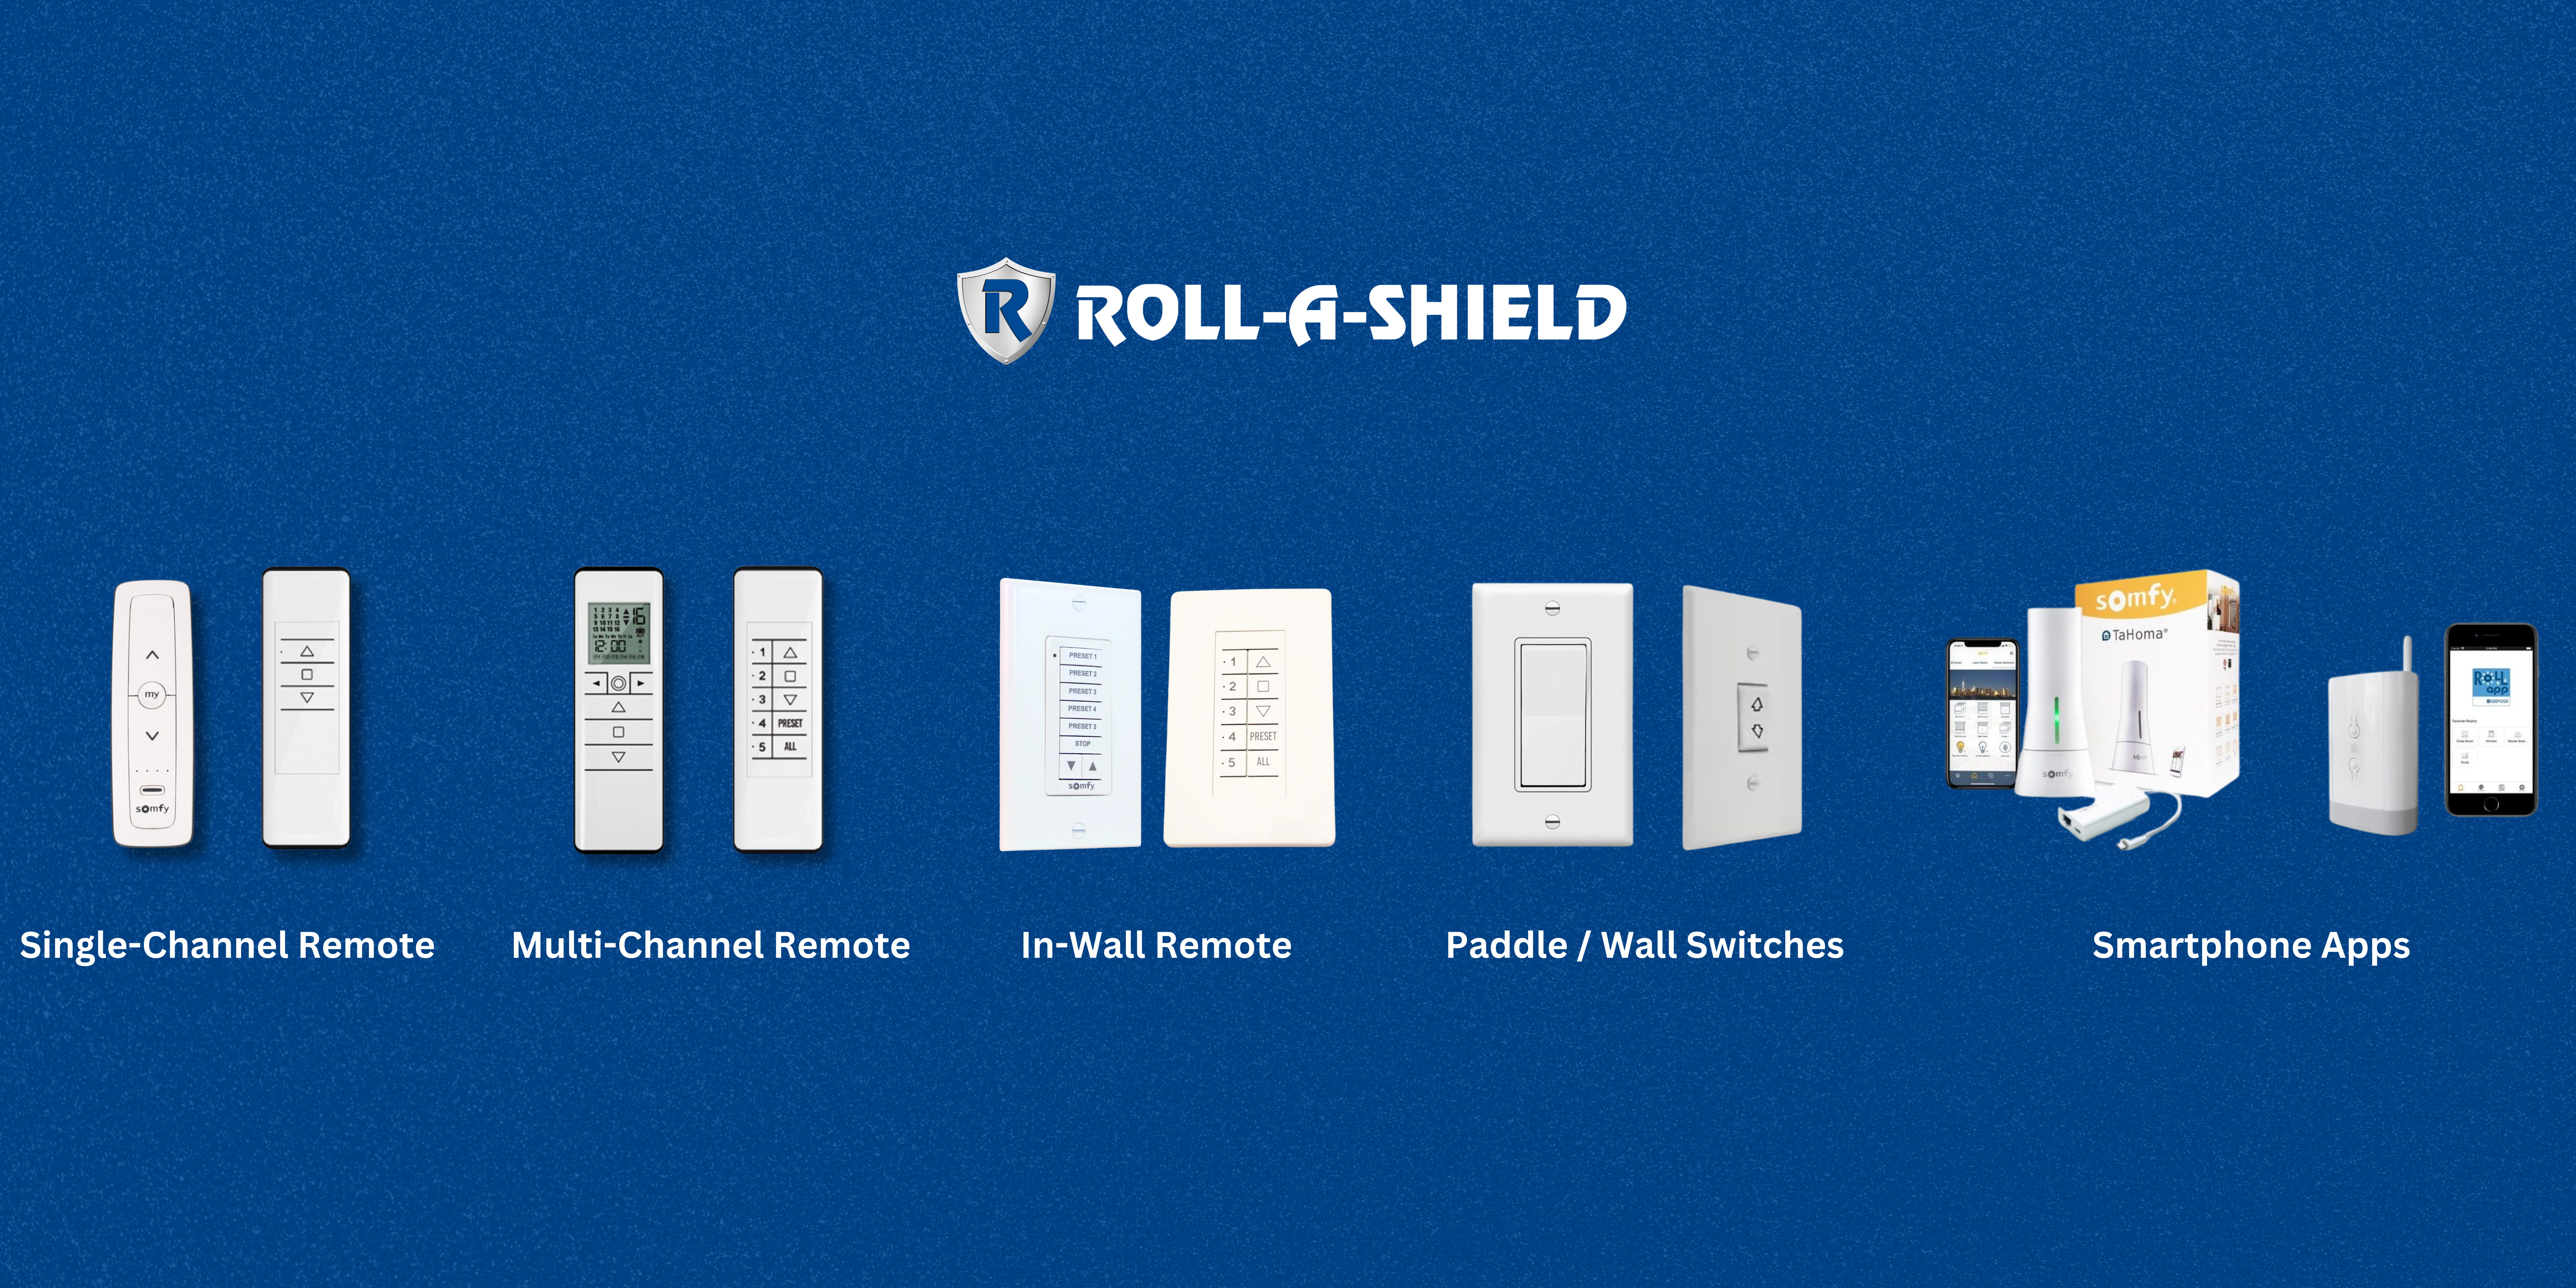 An image of access options for rolling shutters